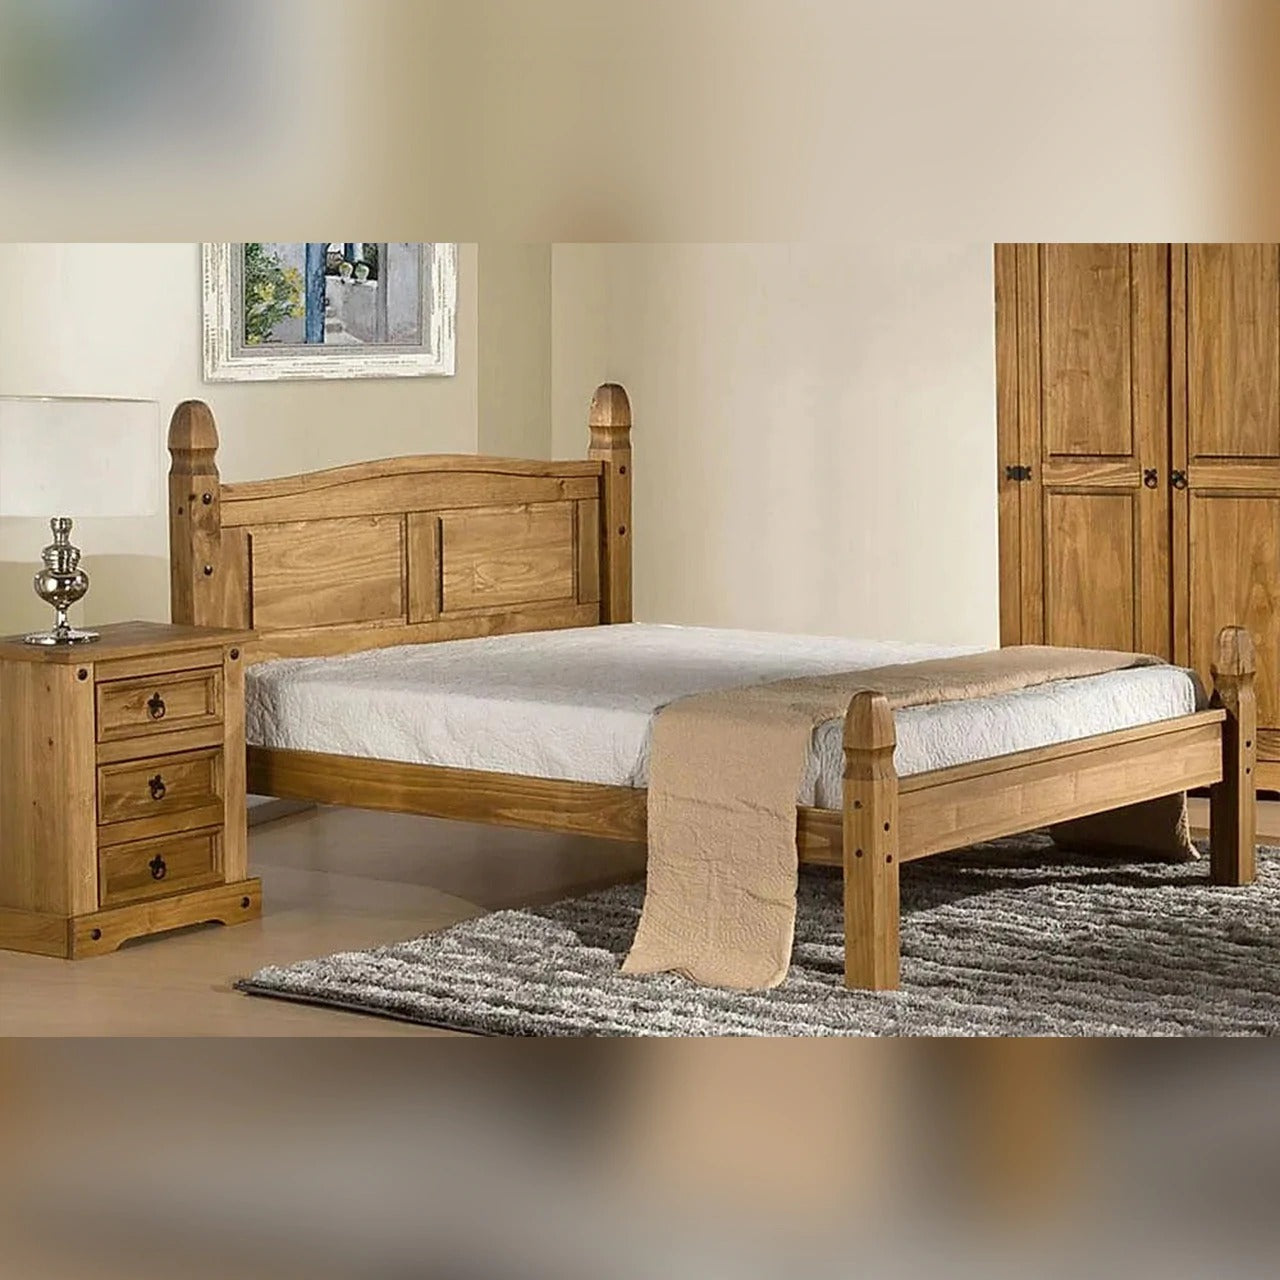 King Size Bed, King Size Cot, King Size Bed With Storage, King Bed